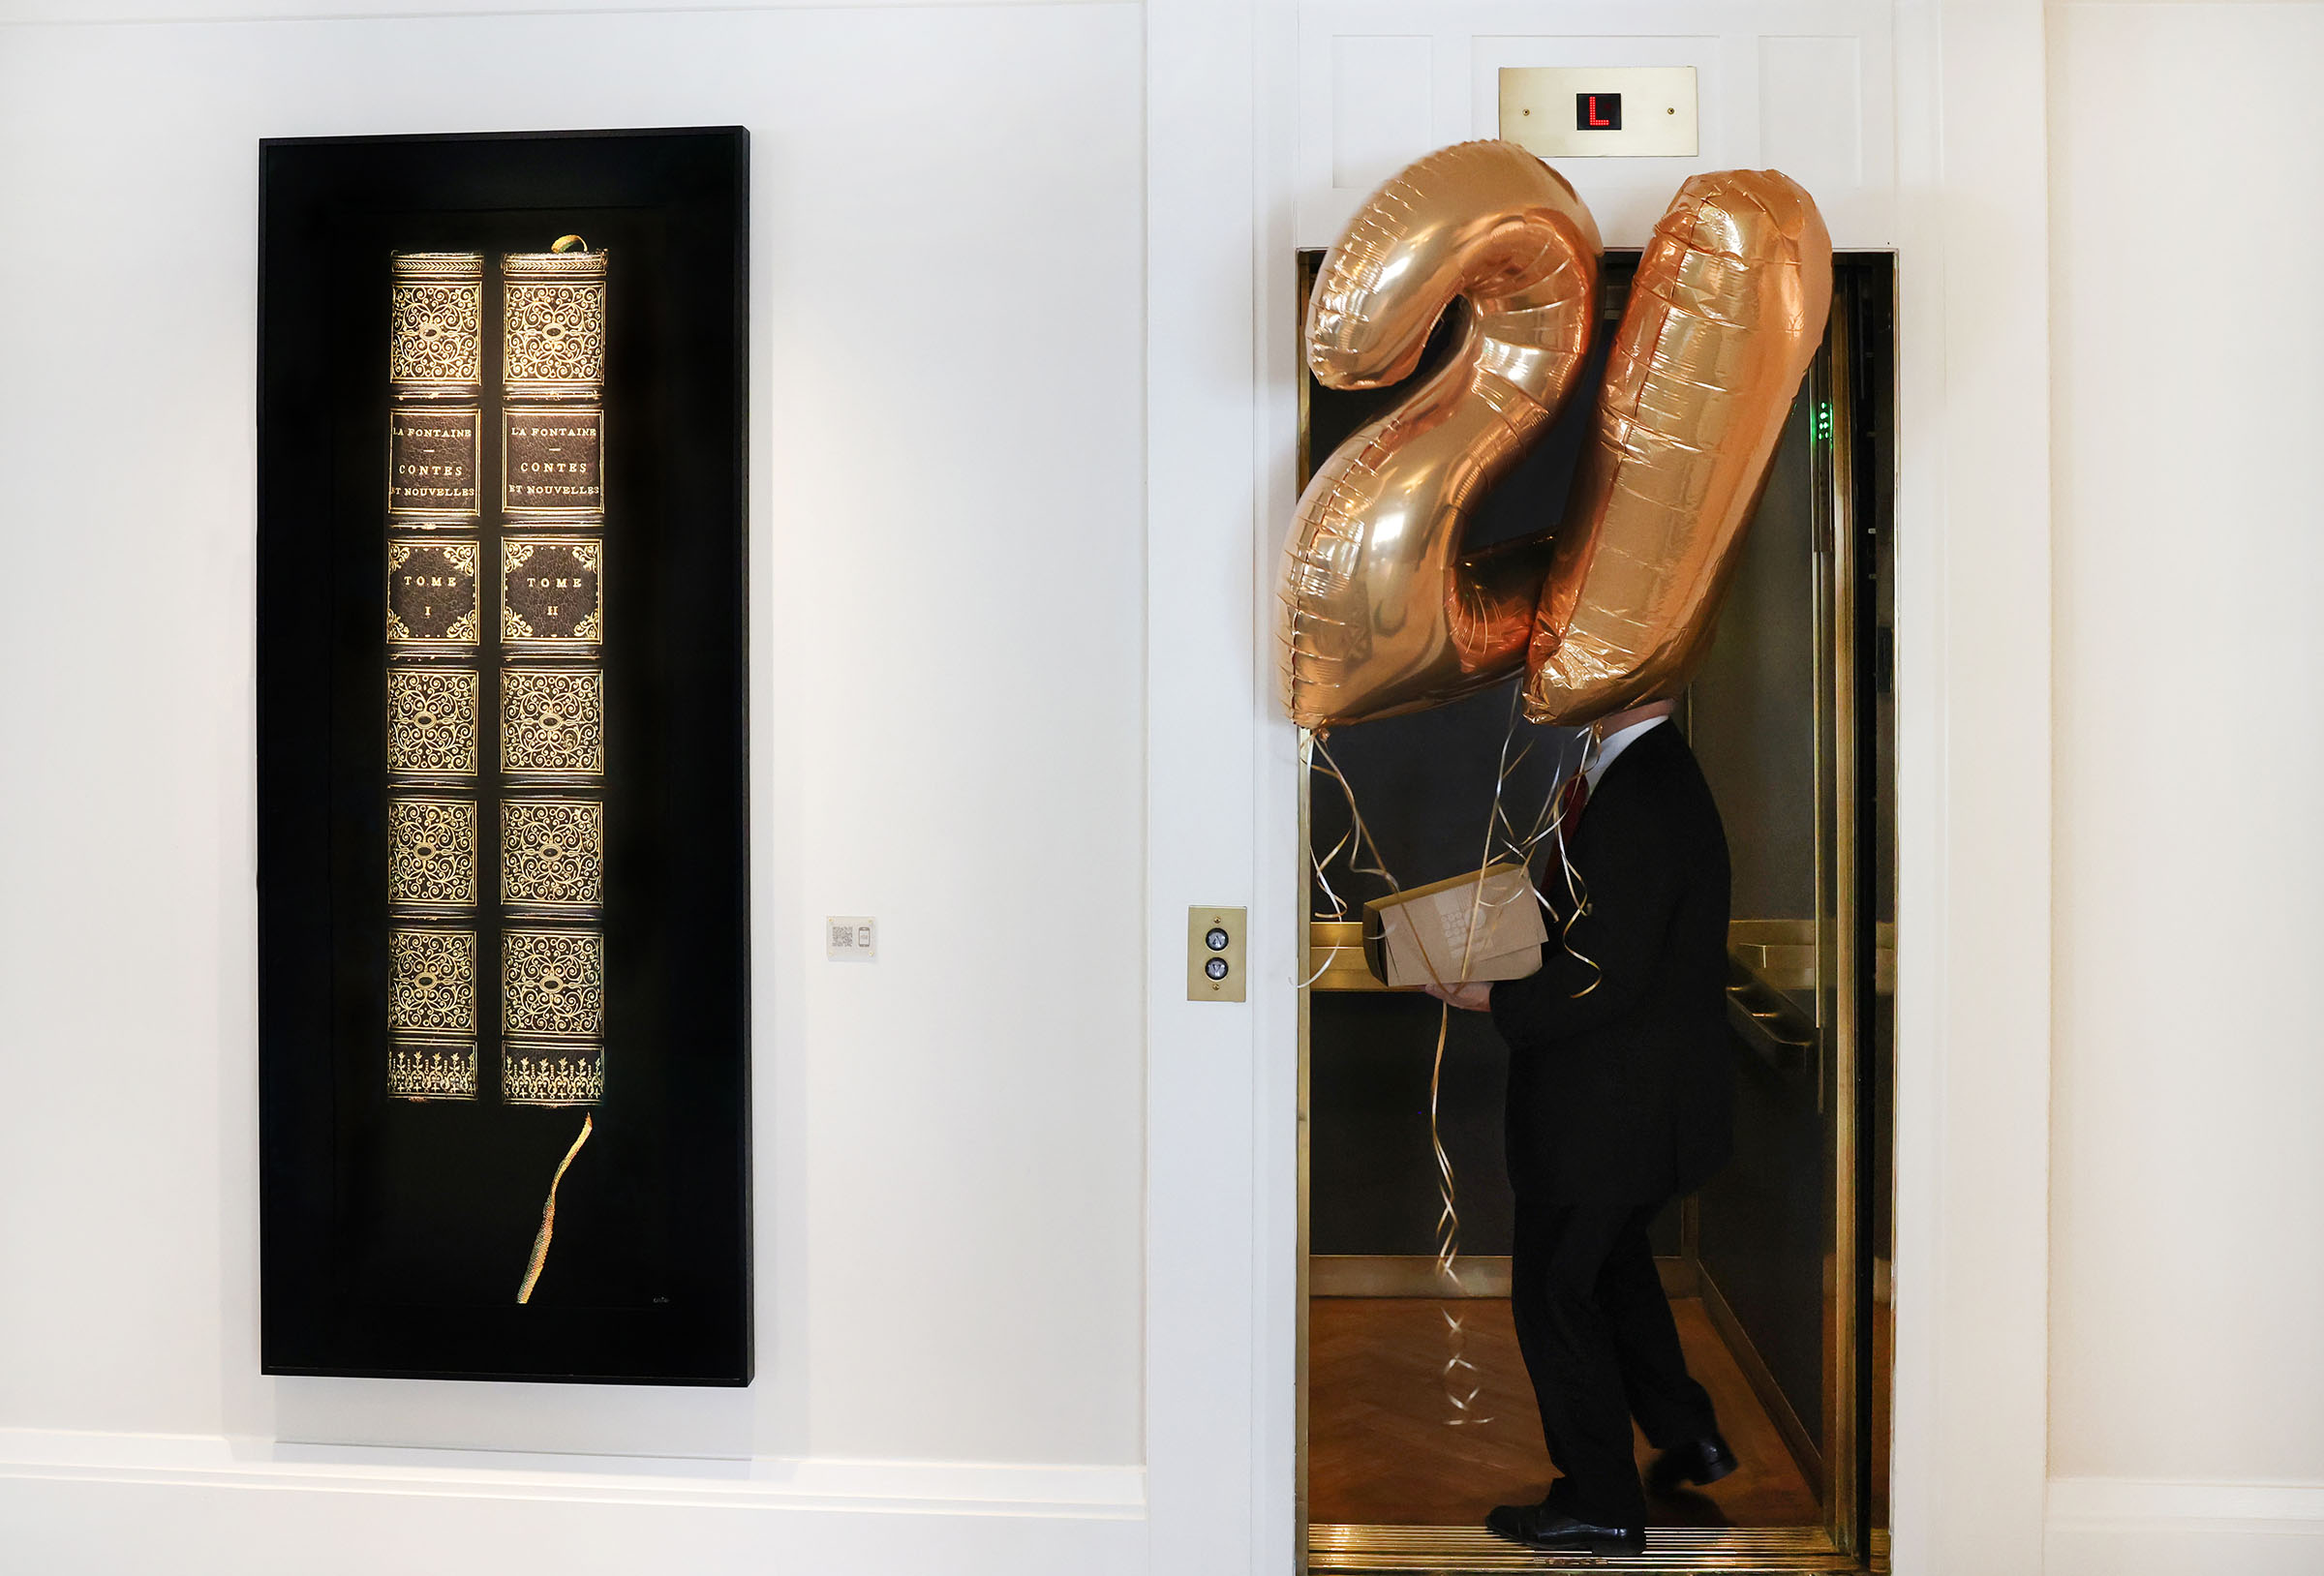 A person in formal attire carries large balloons into an elevator door next to a large painting of books